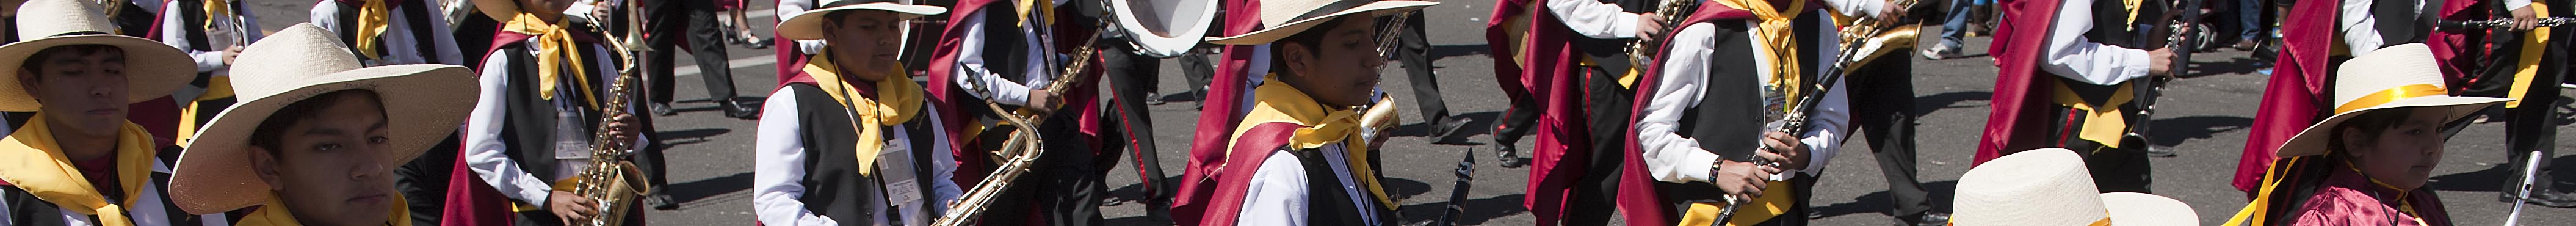 Arequipa 2012 Day Parade - Banner